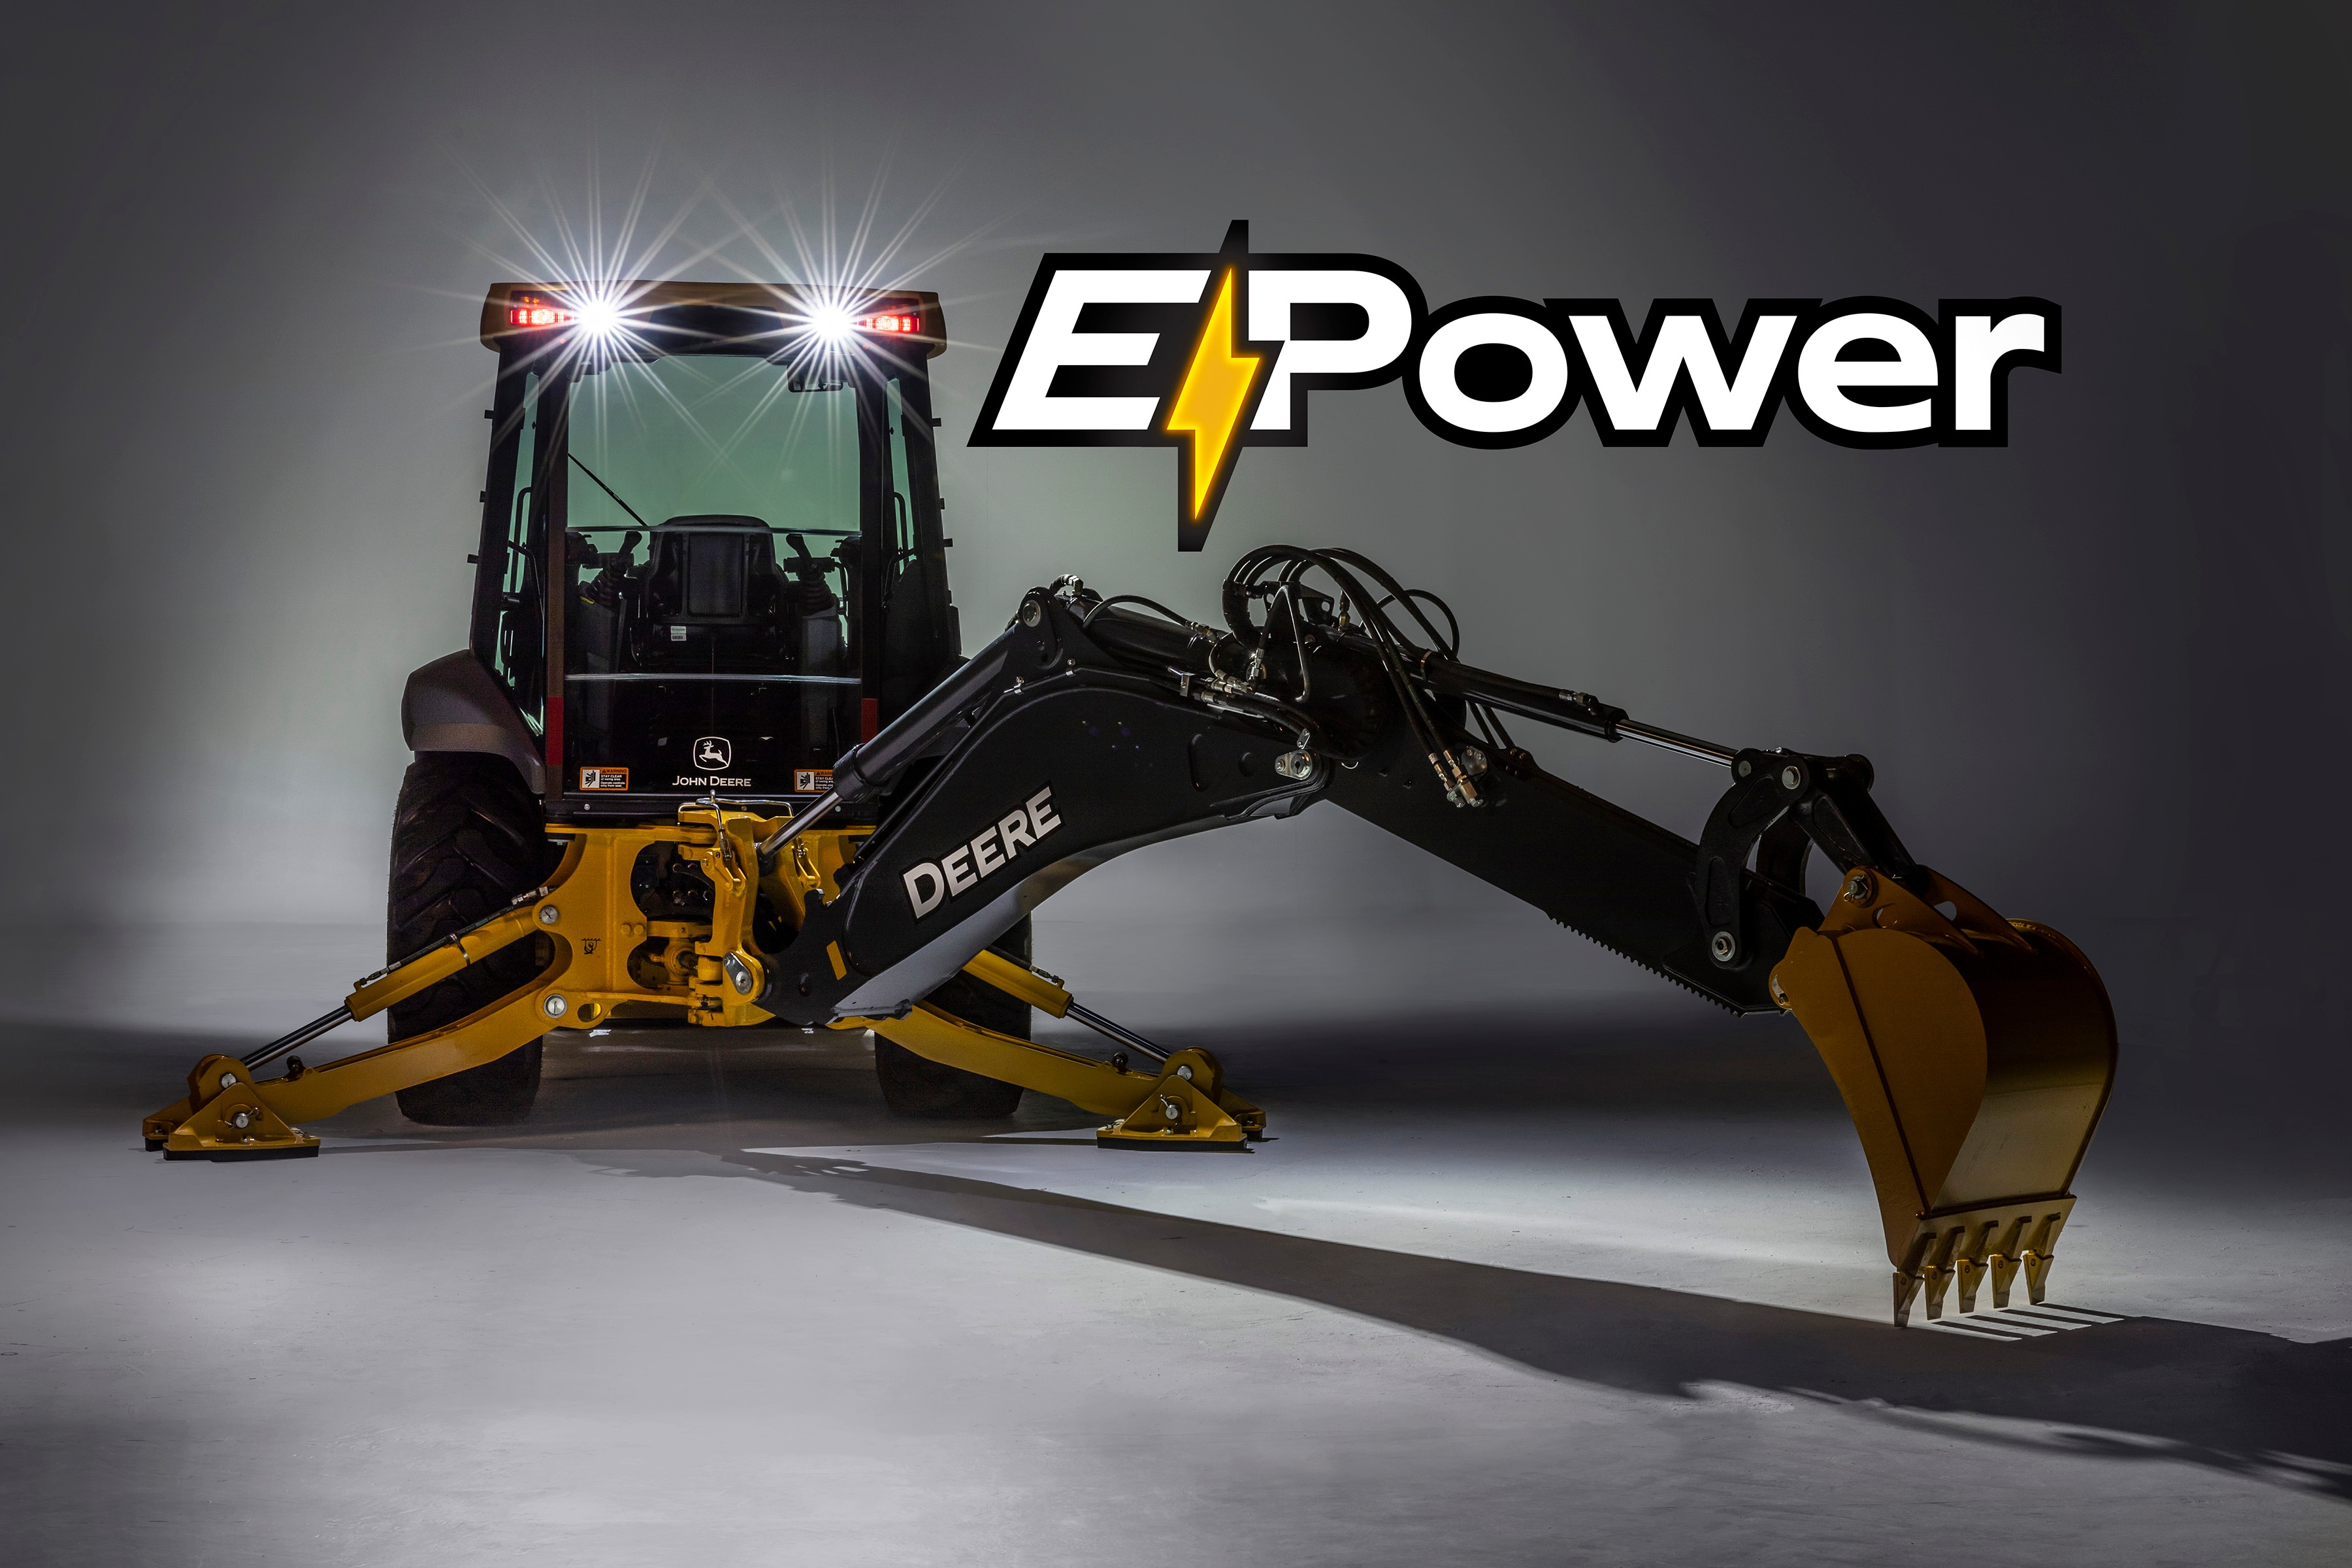 Large studio shot of the electric backhoe with E-Power graphic